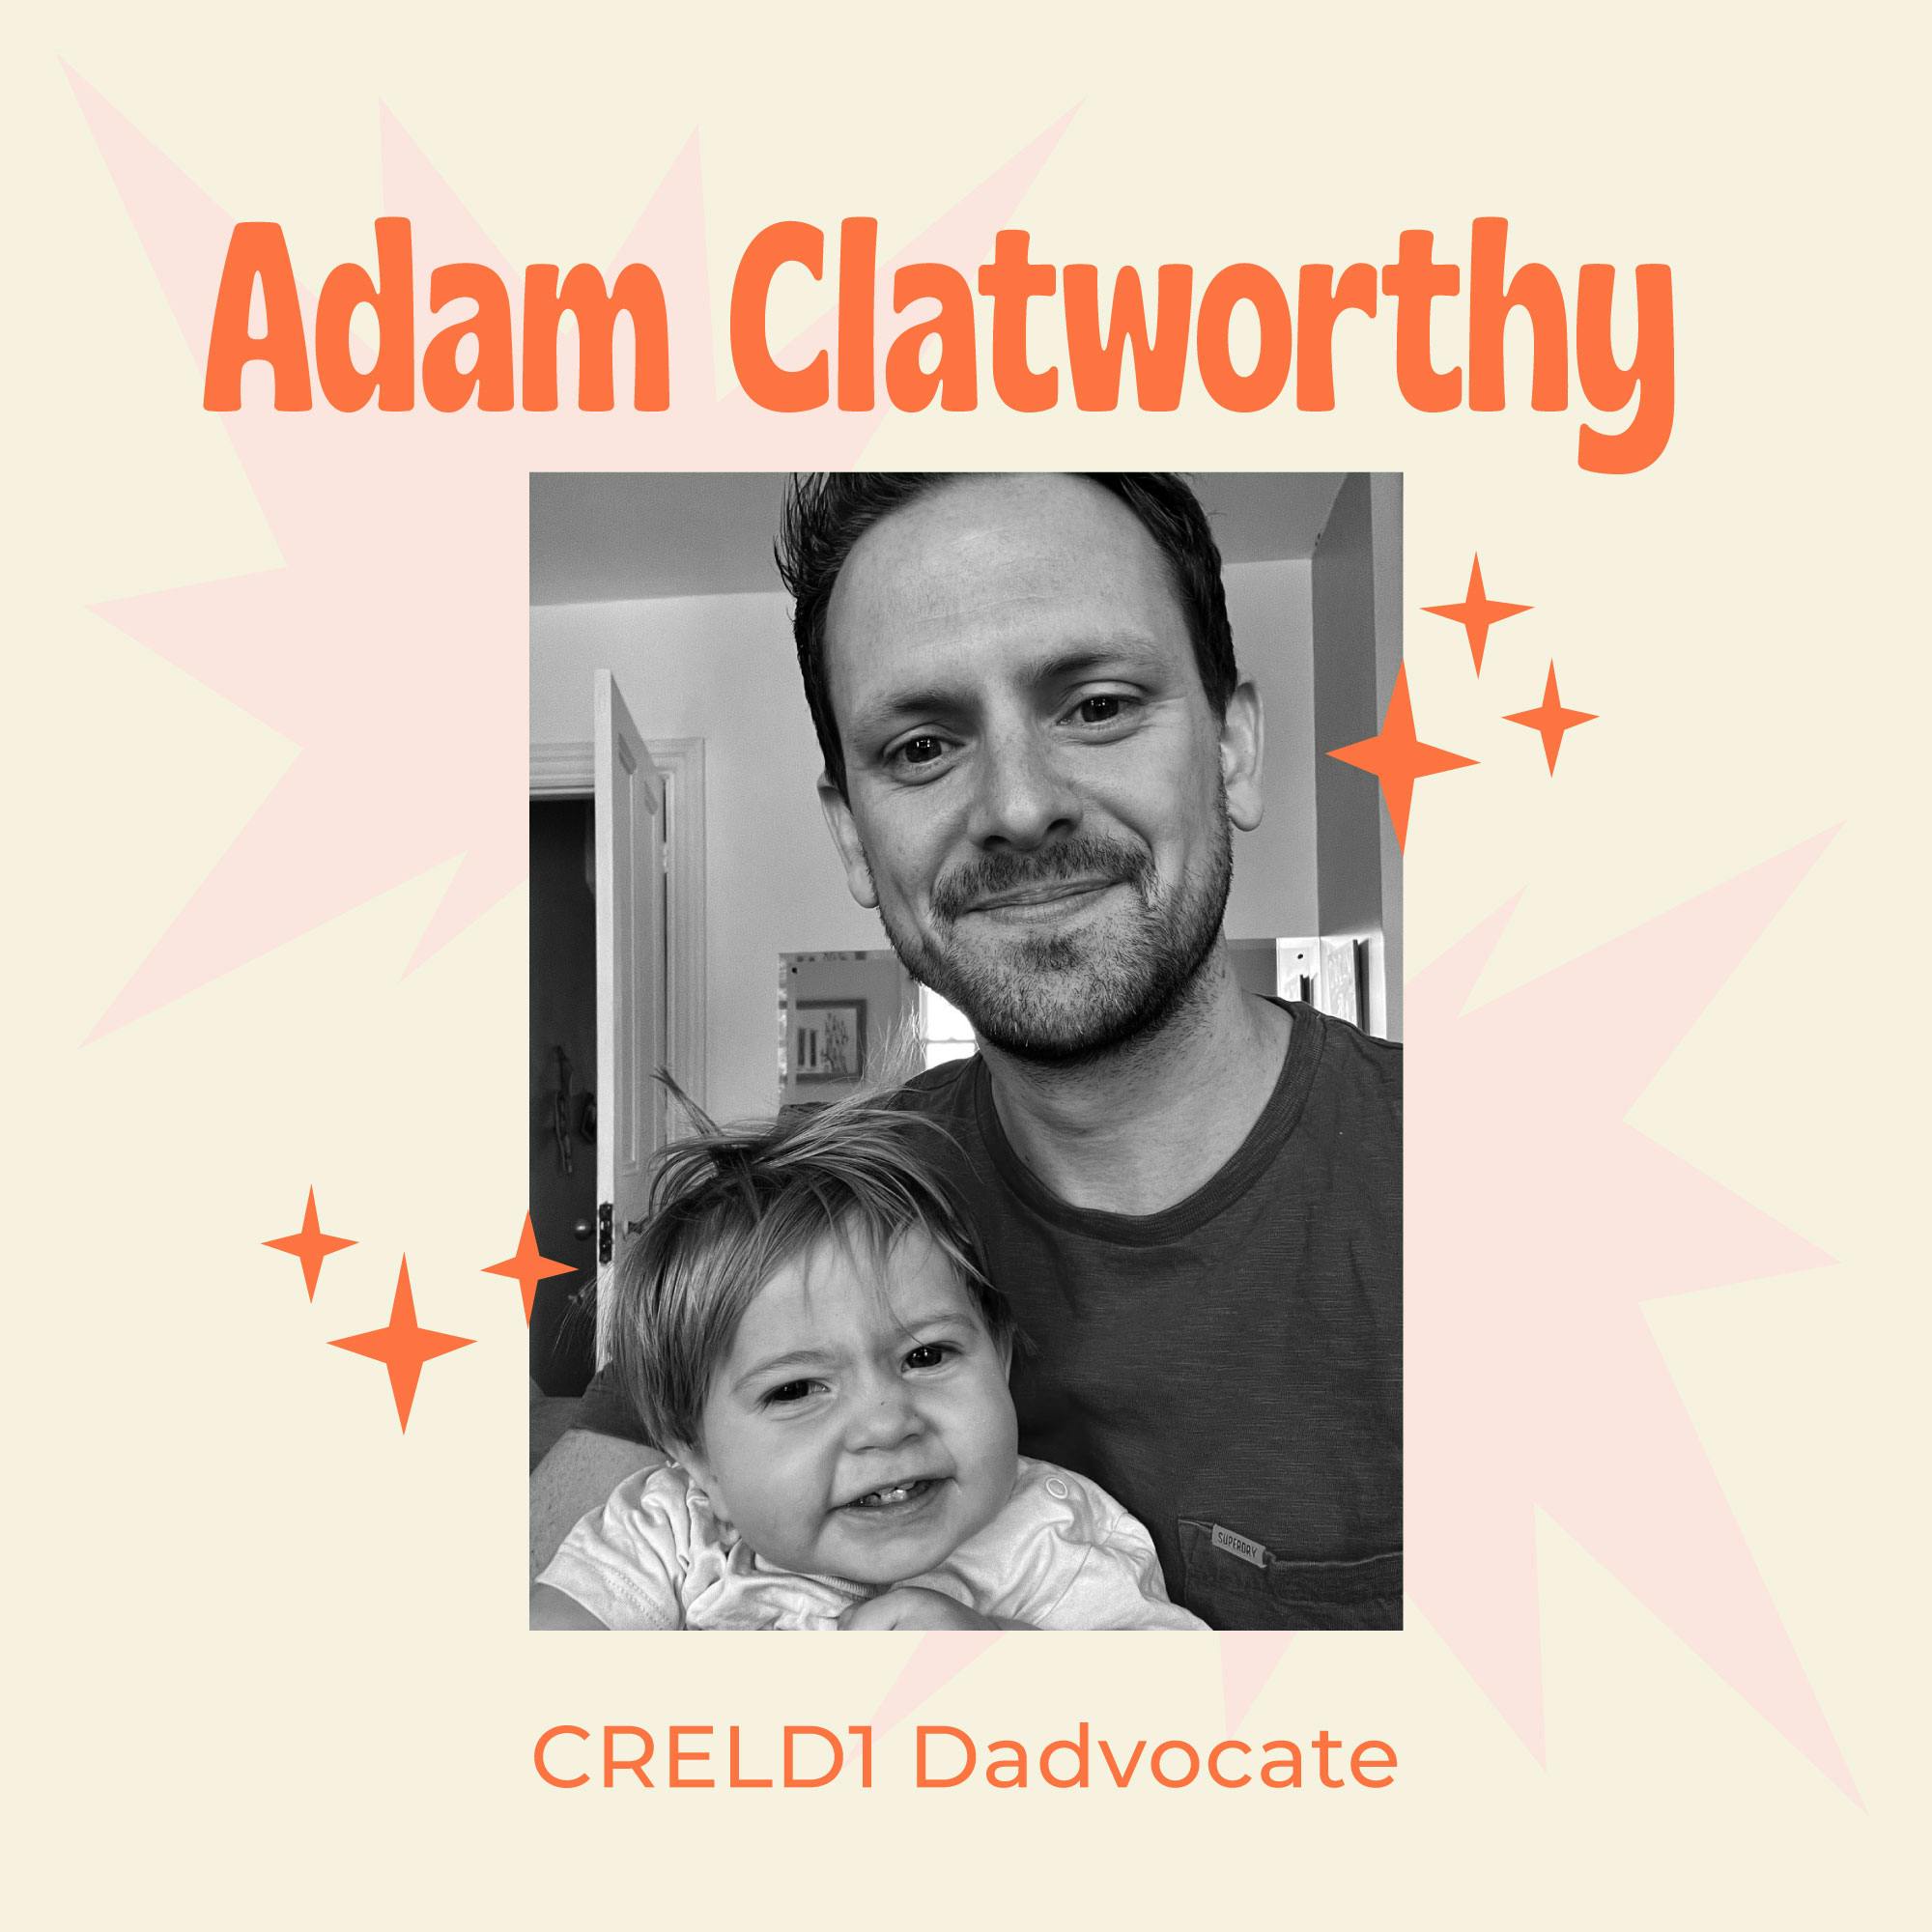 CRELD1 Dadvocate Paying the Ultimate Price – Seeking Diagnosis for His Two Children, and Raising Awareness with Adam Clatworthy